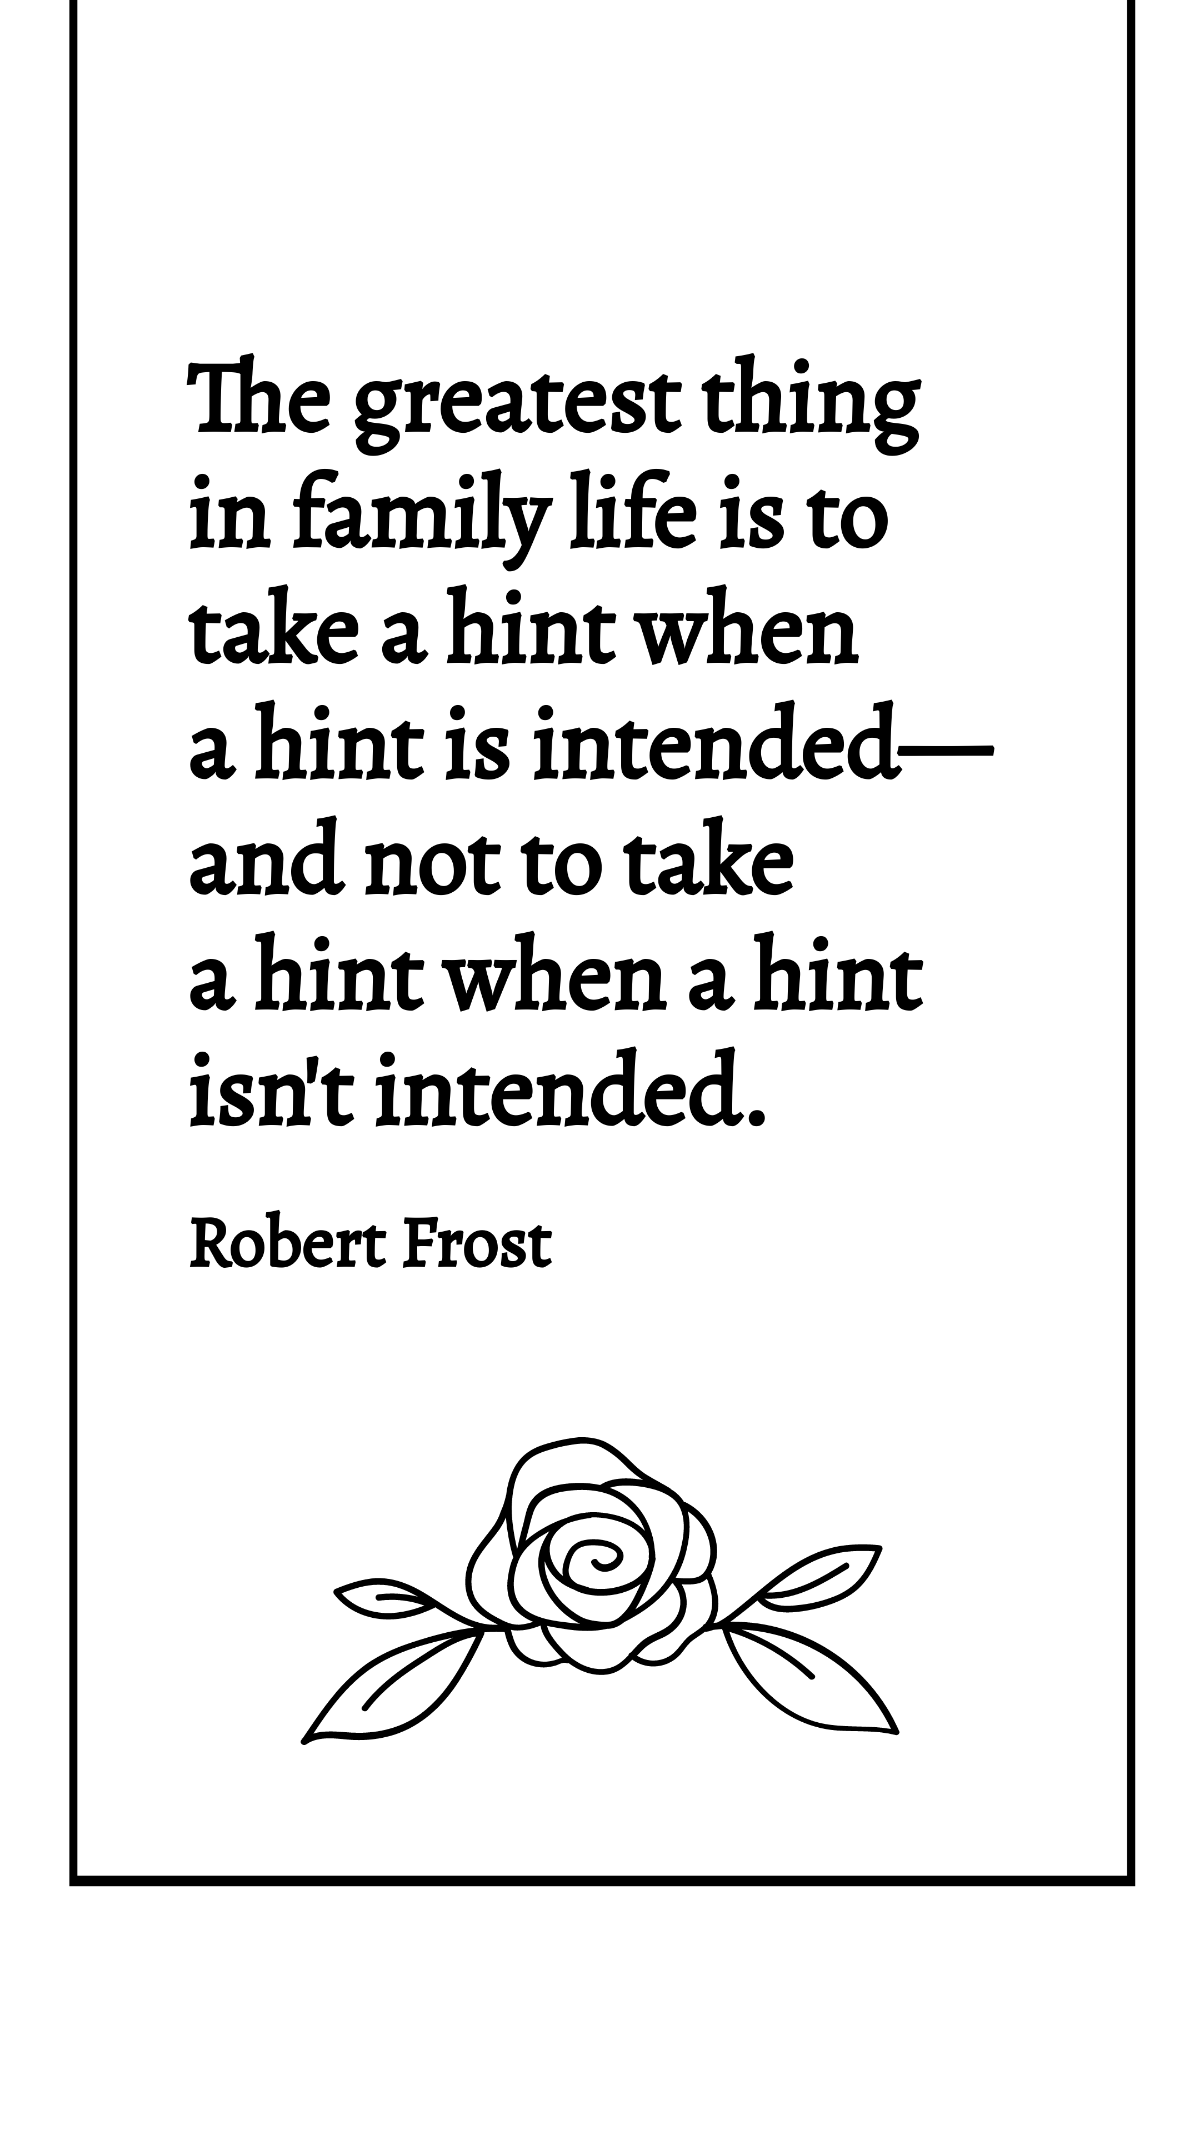 Robert Frost - The greatest thing in family life is to take a hint when a hint is intended-and not to take a hint when a hint isn't intended.